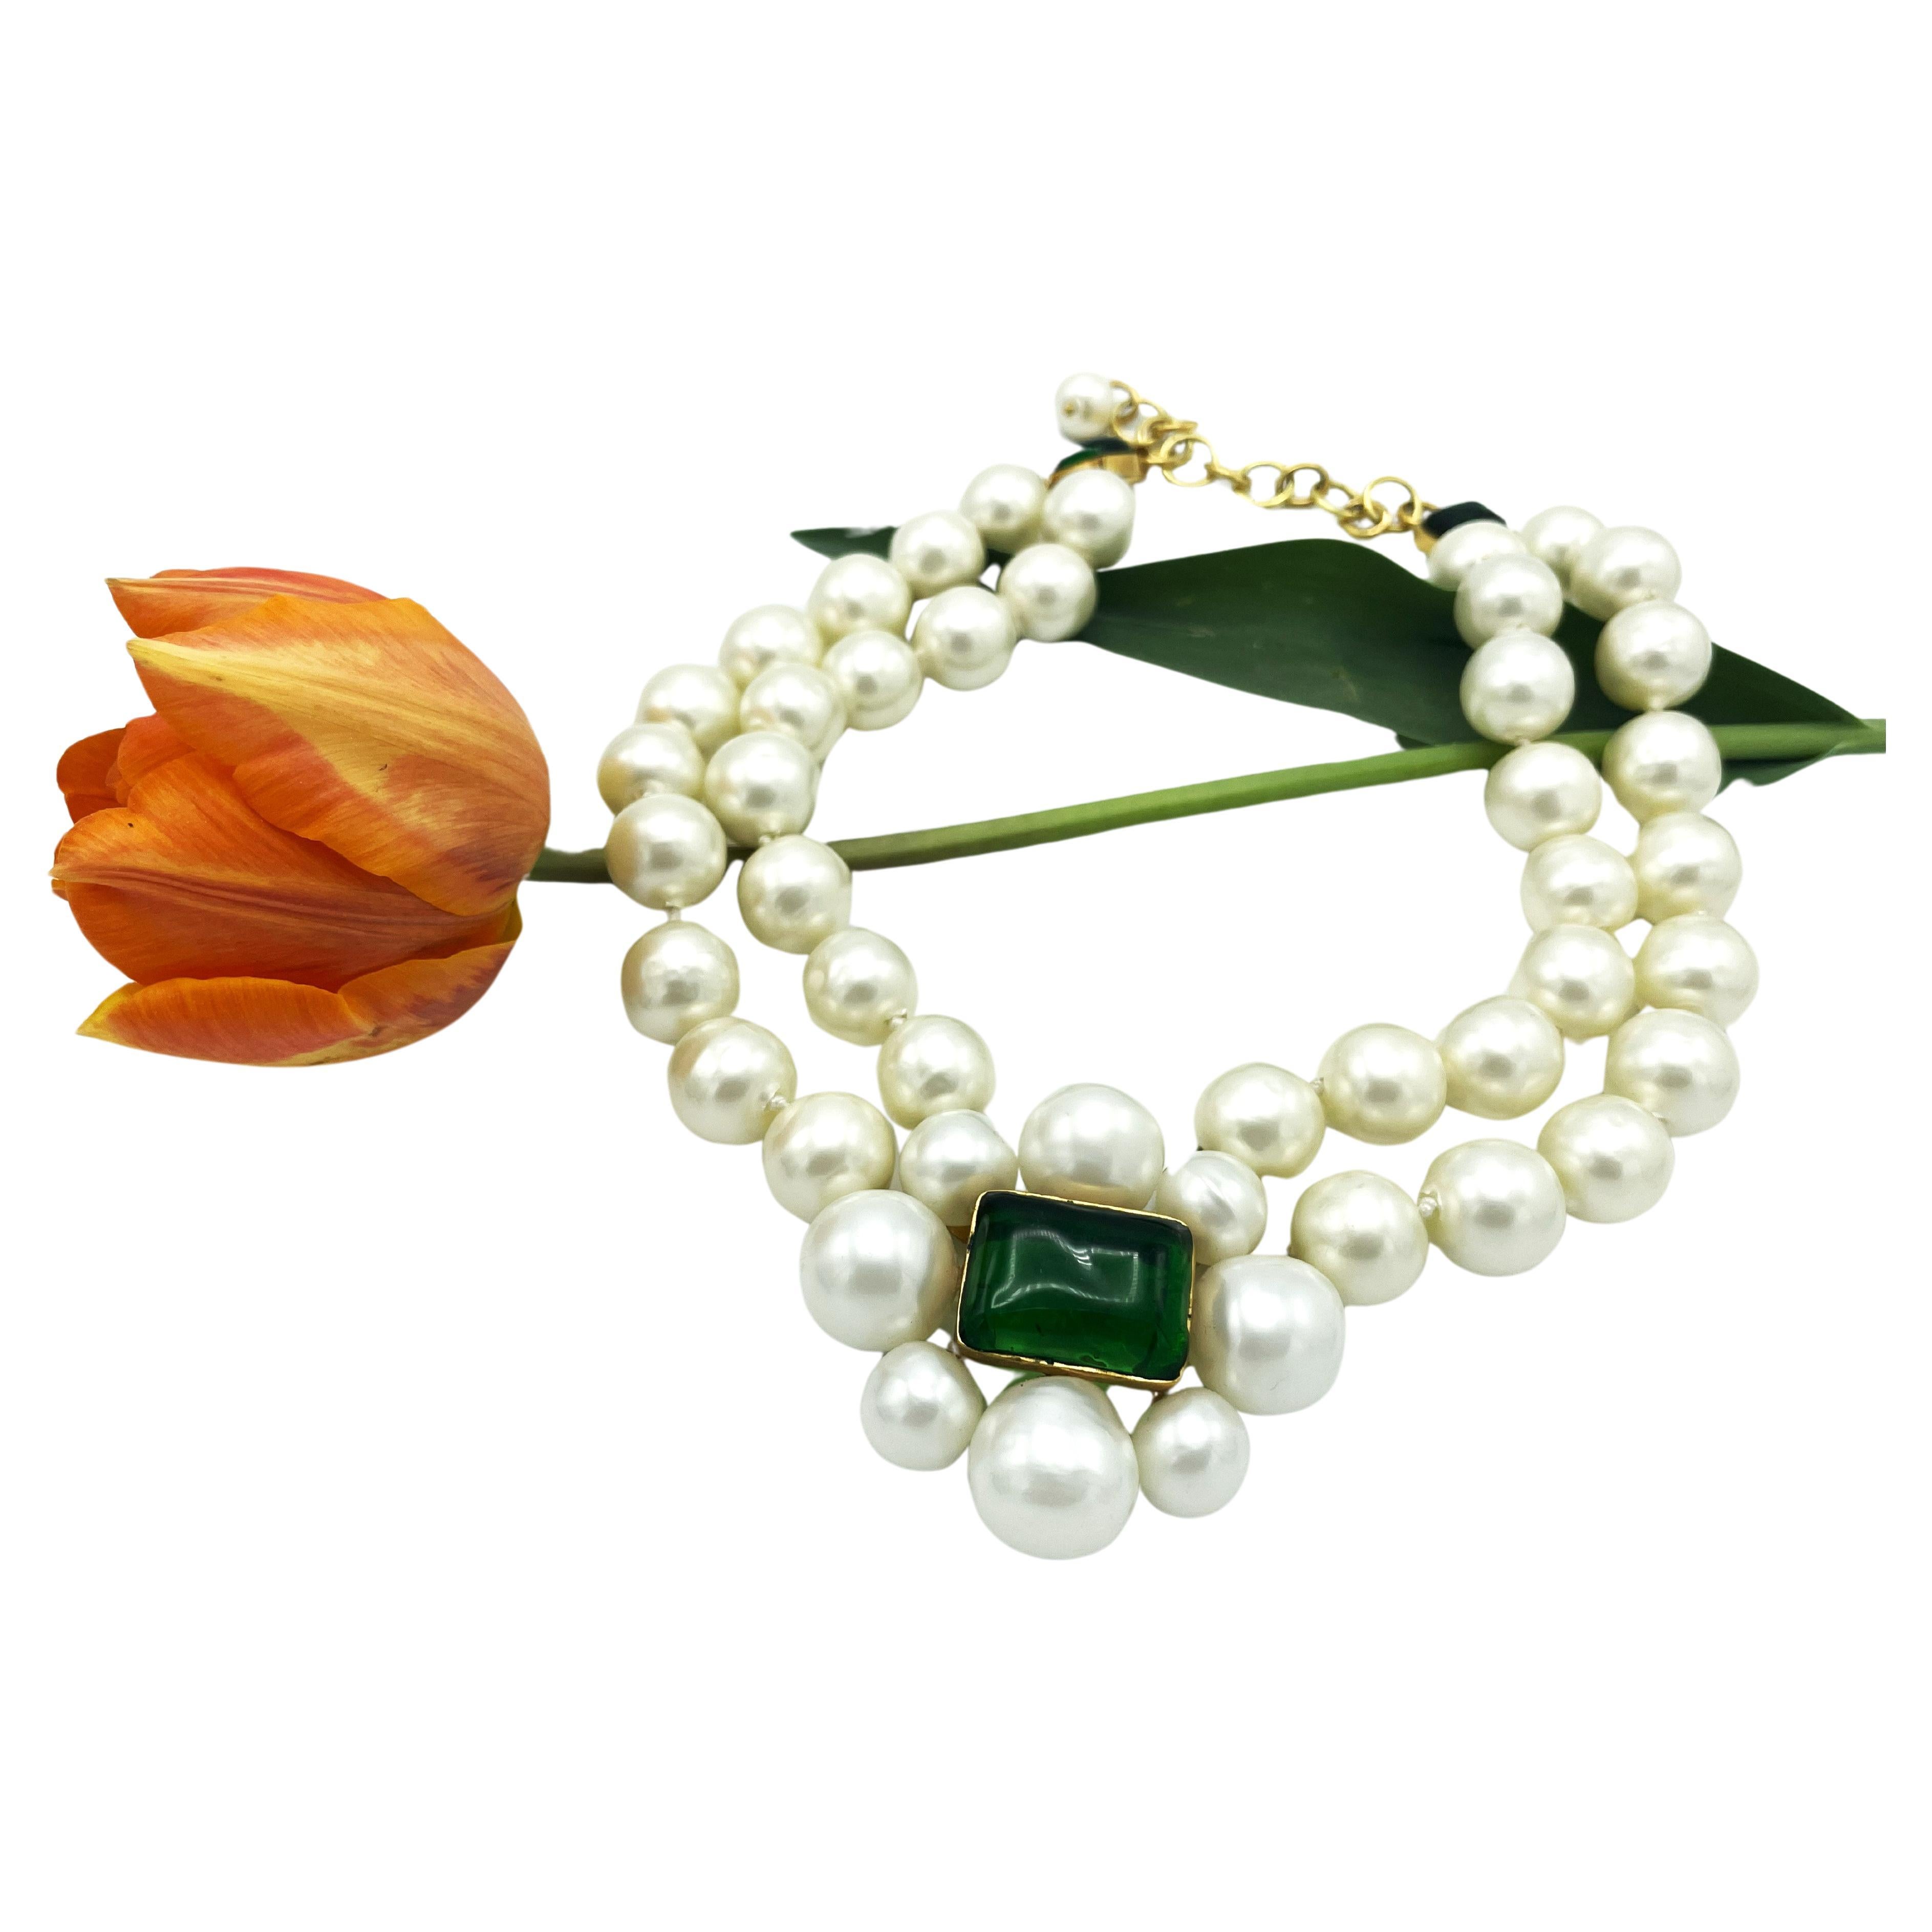 CHANEL 2 row collier with larg pearls,  green Gripoix signed 97A - 1997 Autumn For Sale